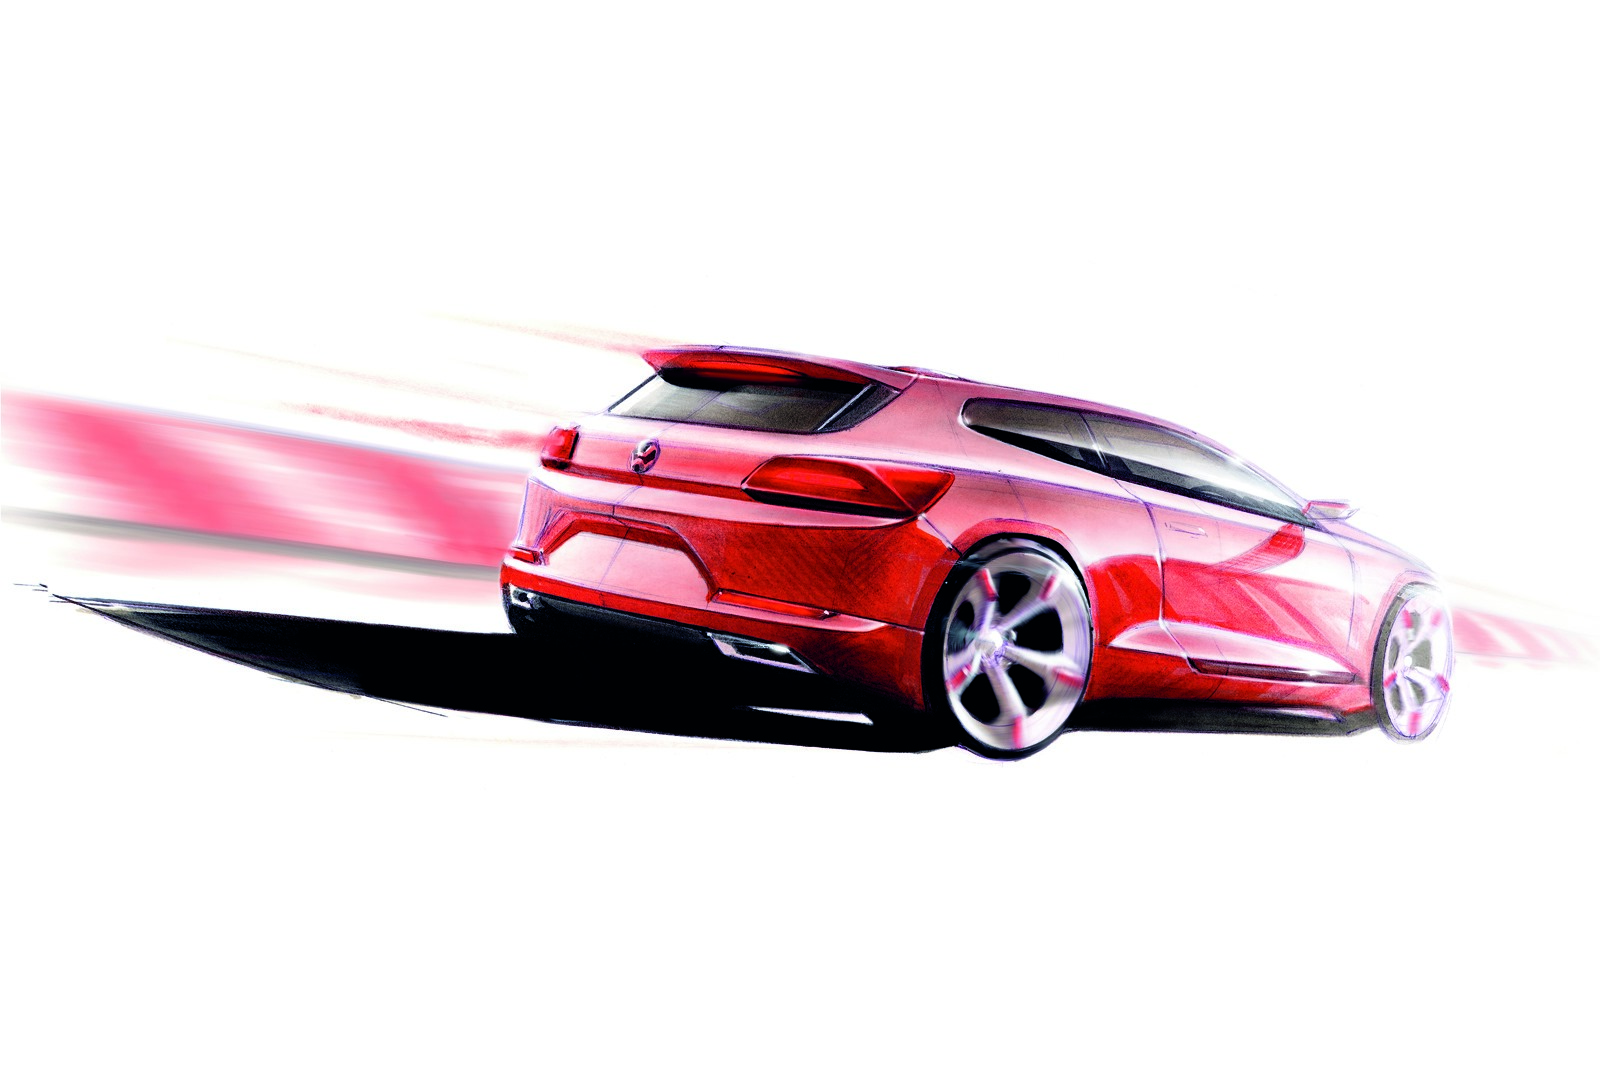 [VW-Scirocco-official-sketches-2008-4%255B3%255D.jpg]